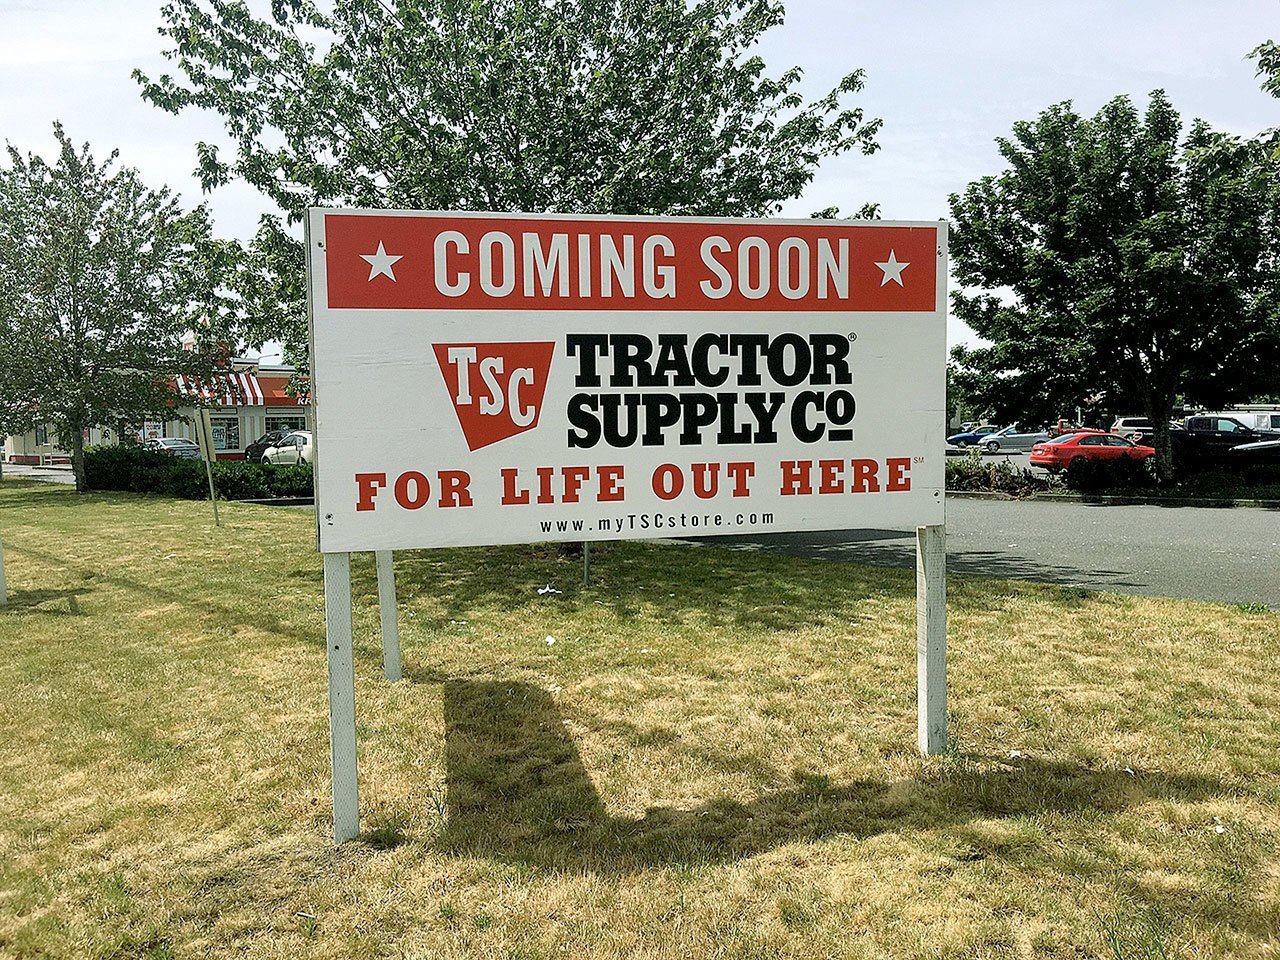 Tractor Supply Company to open store in Arlington